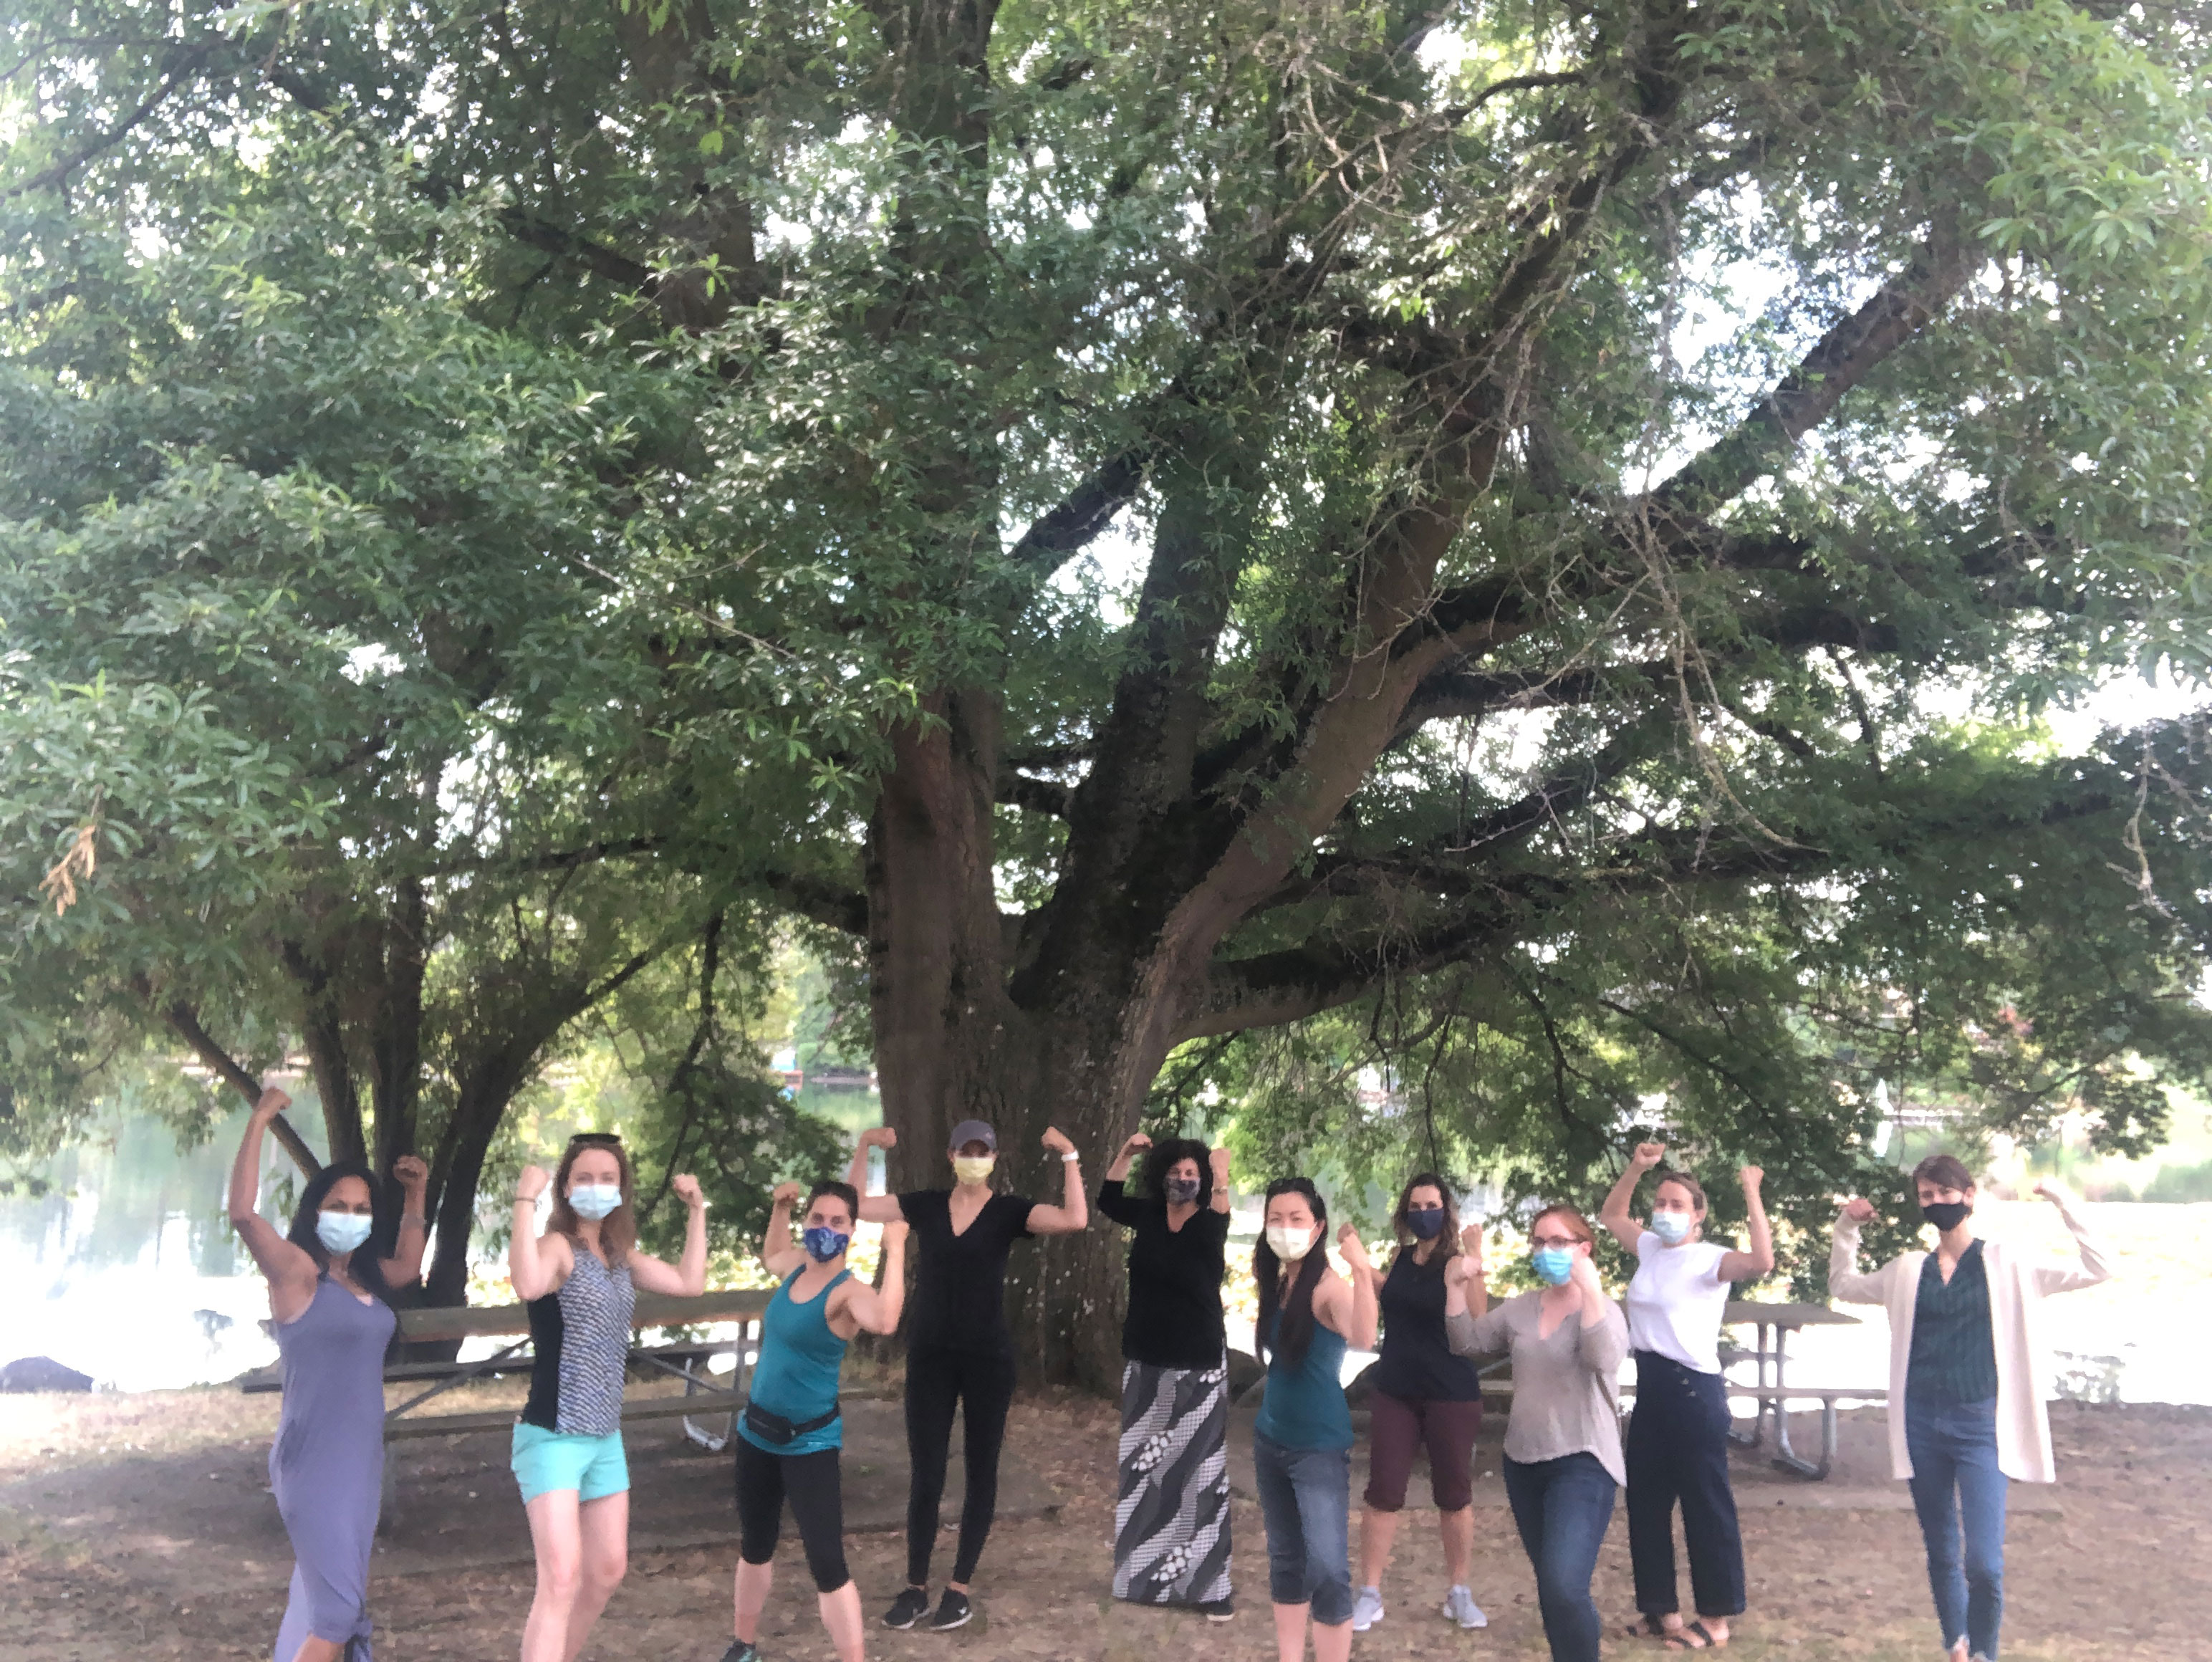 Group picture of 10 Diagnostic Radiology Women in Radiology in front of a large tree at Blue Lake Park Aug 2020. We had our first in person event for Women in Radiology in August, which was was a Book Club Social held at Blue Lake Park. The book was Dare to Lead by Brene Brown.